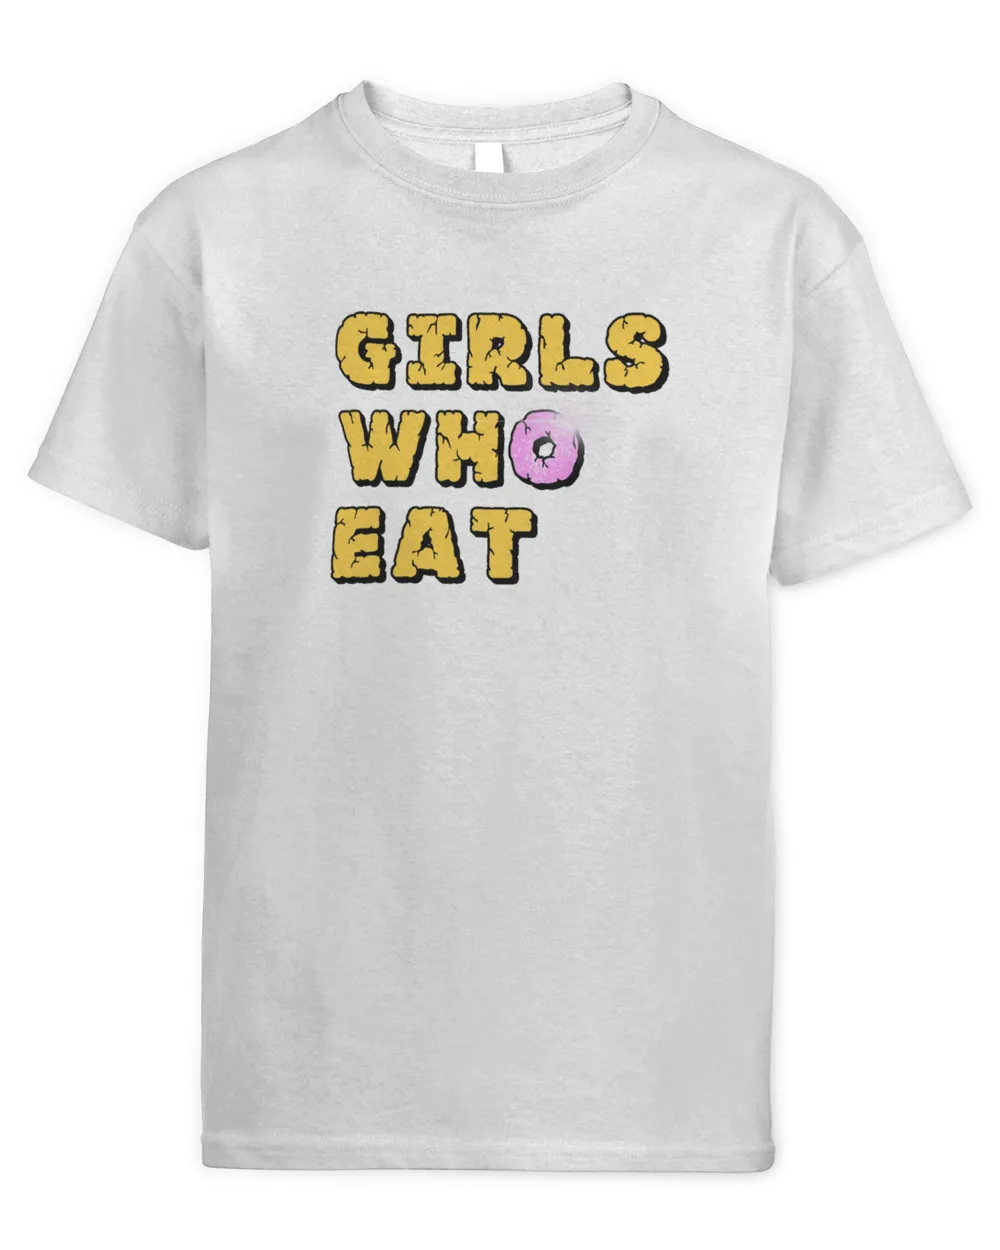 girls who eat Essential T-Shirt